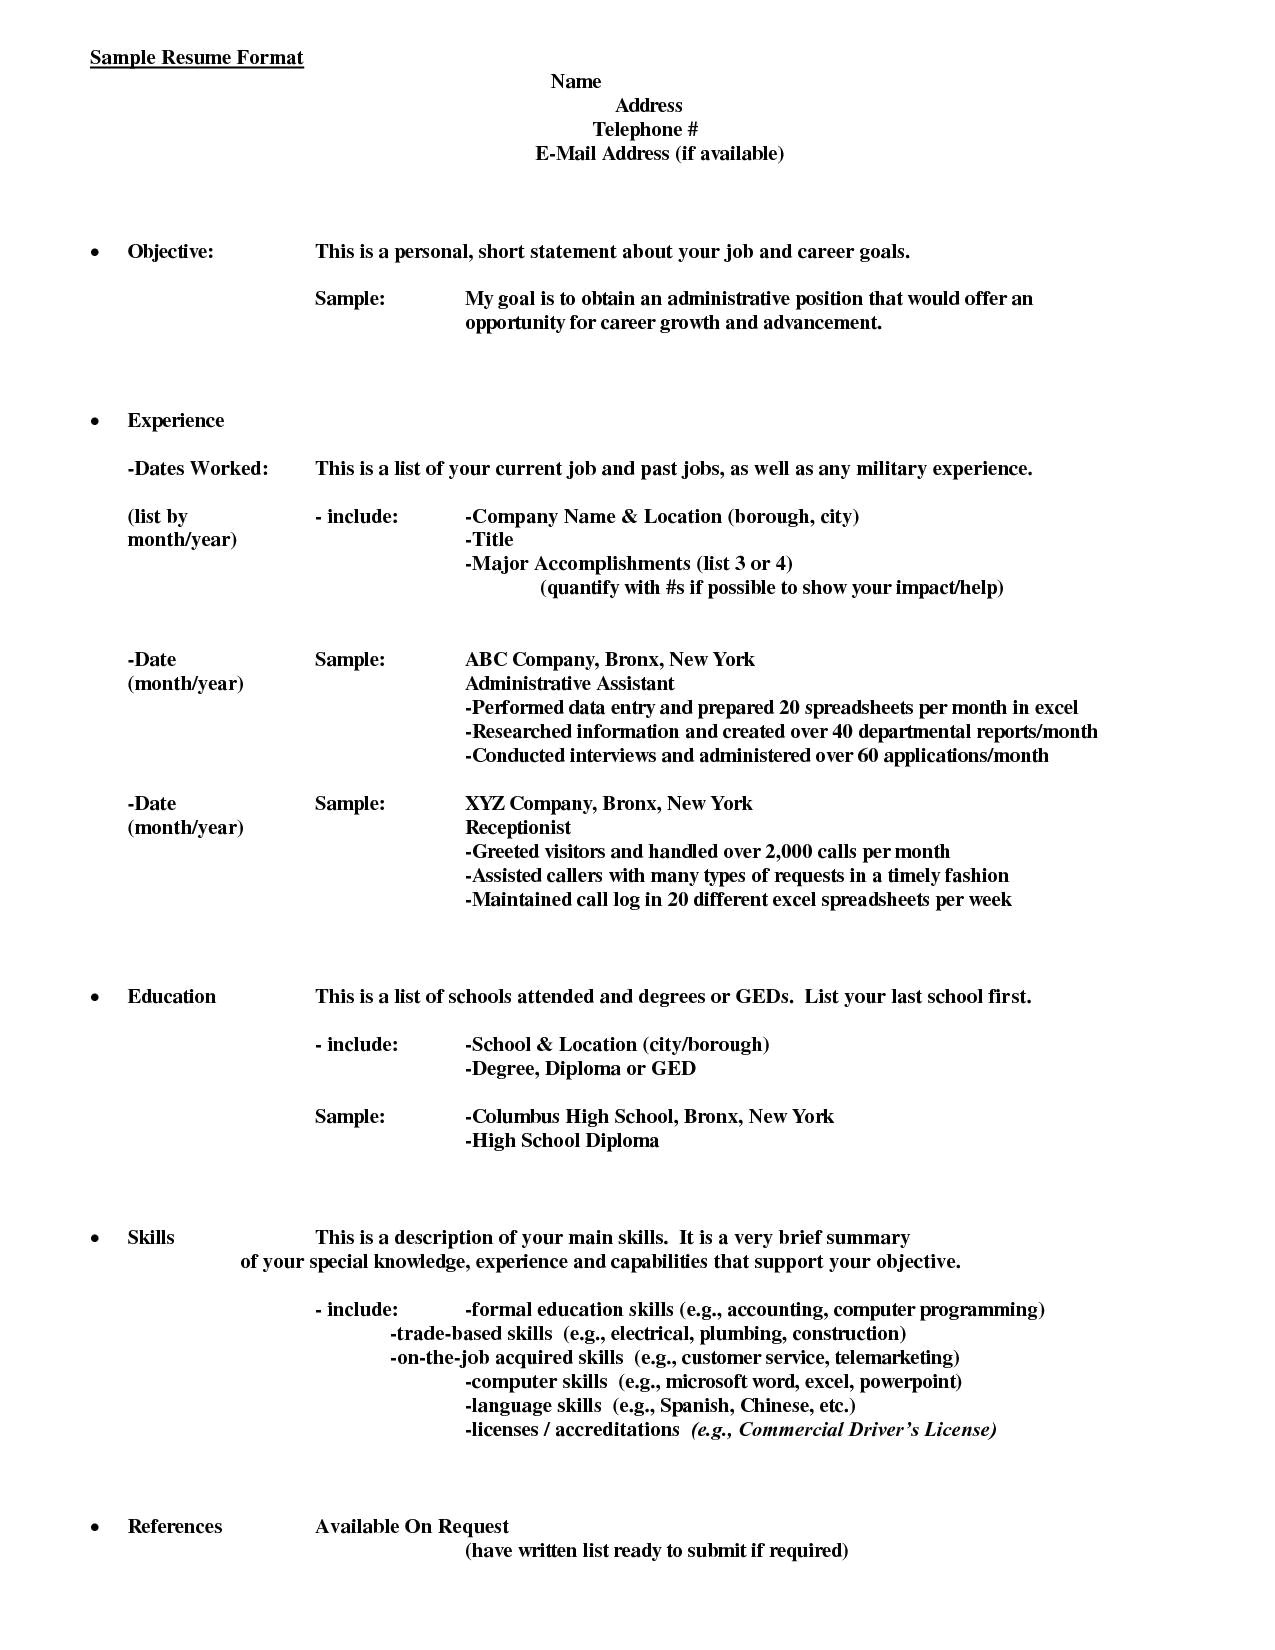 sample resume for diploma electrical engineer